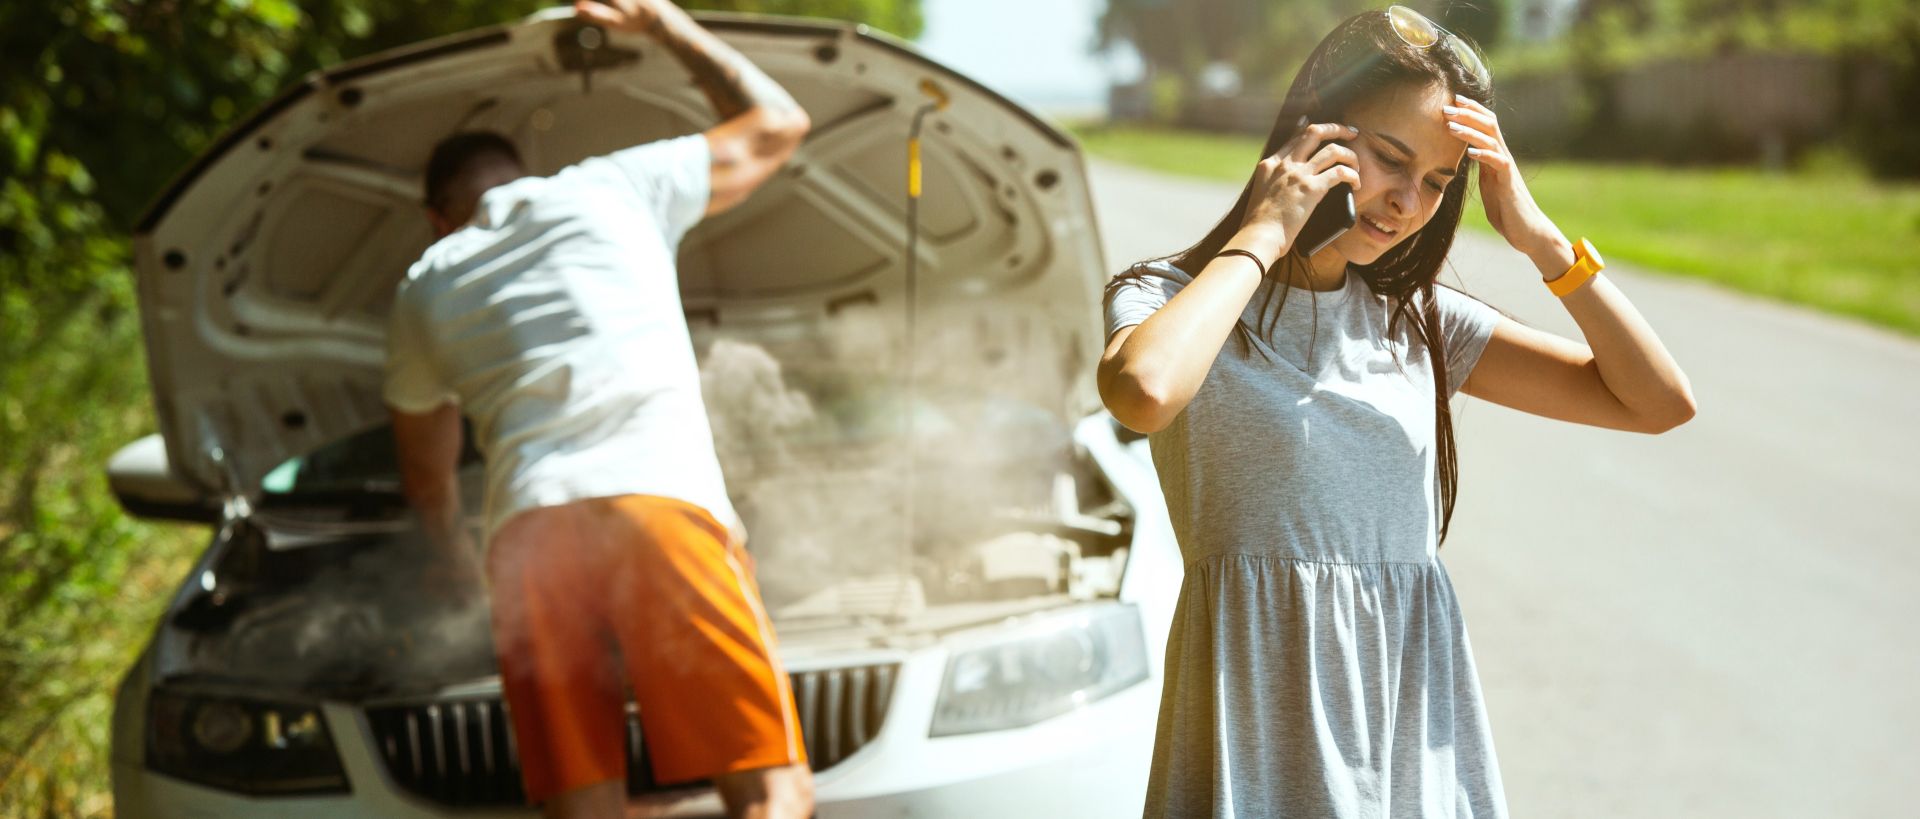 A couple in front of broken down car; he is looking at the engine and she is on her cellphone, looking stressed